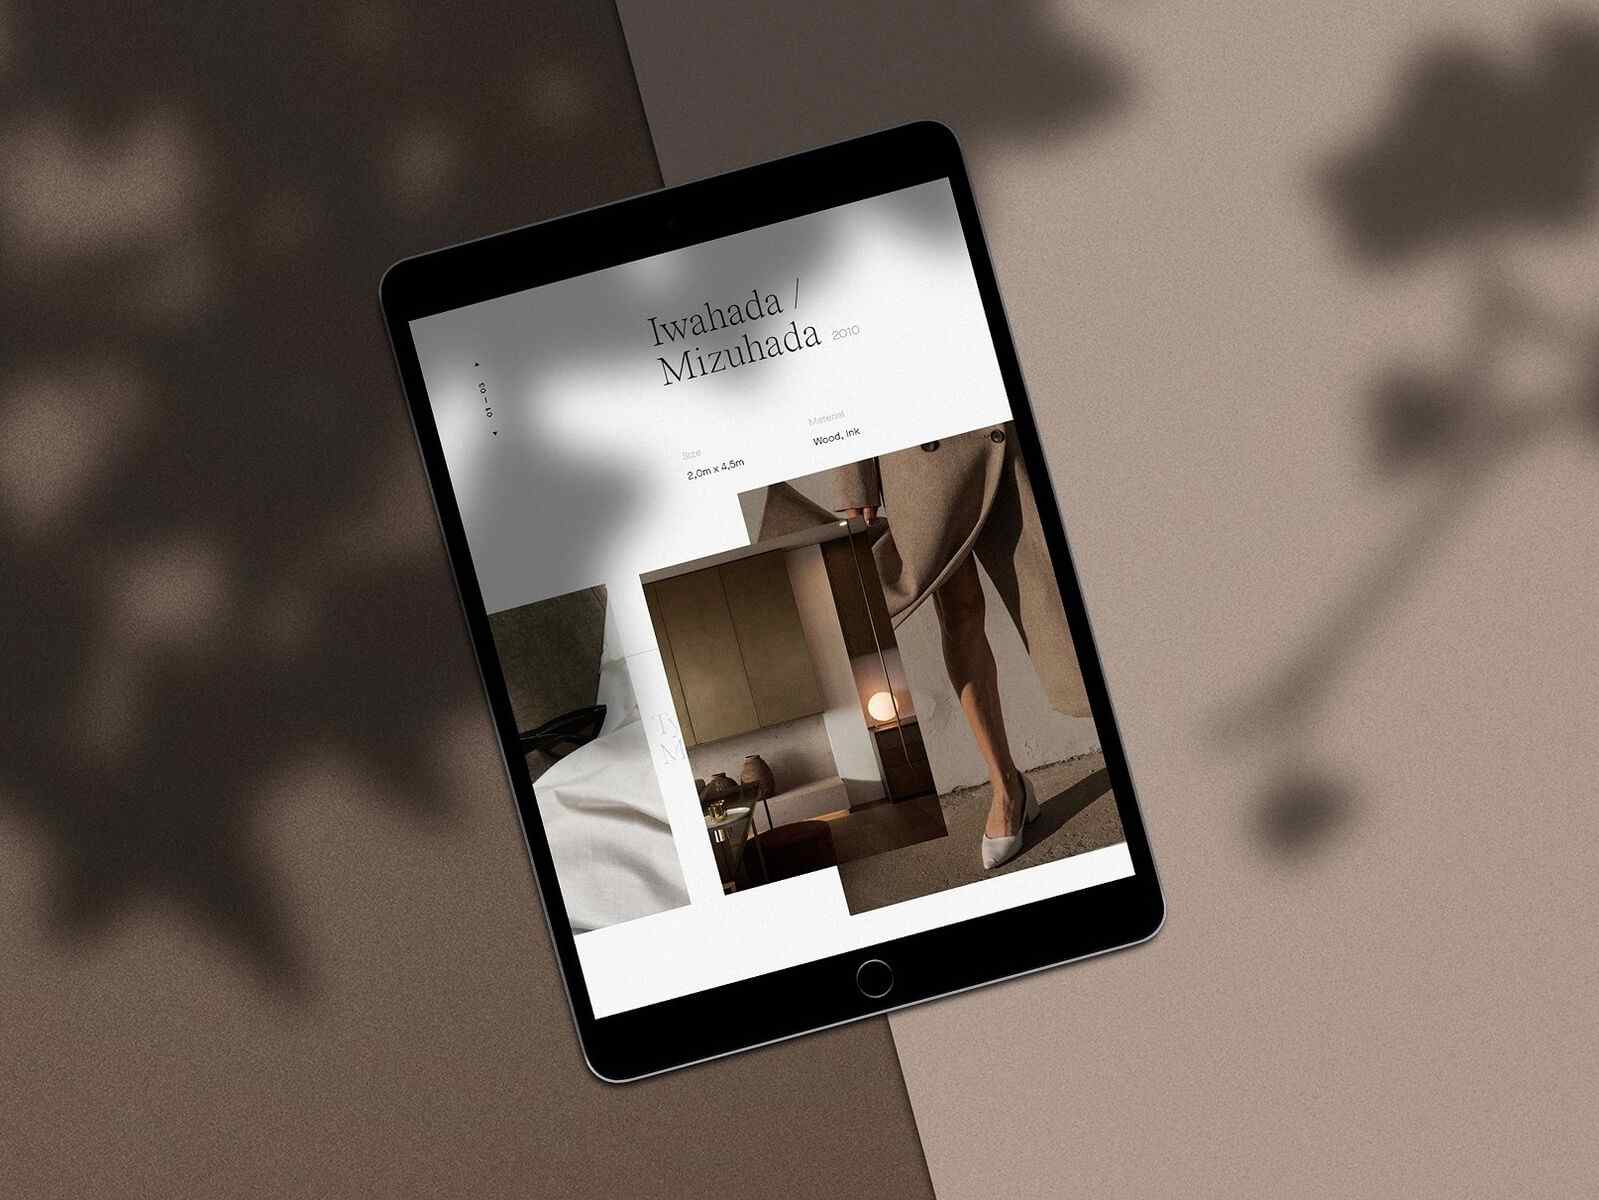 20 Best Free Ipad Mockups And Templates Psd Sketch In 2019